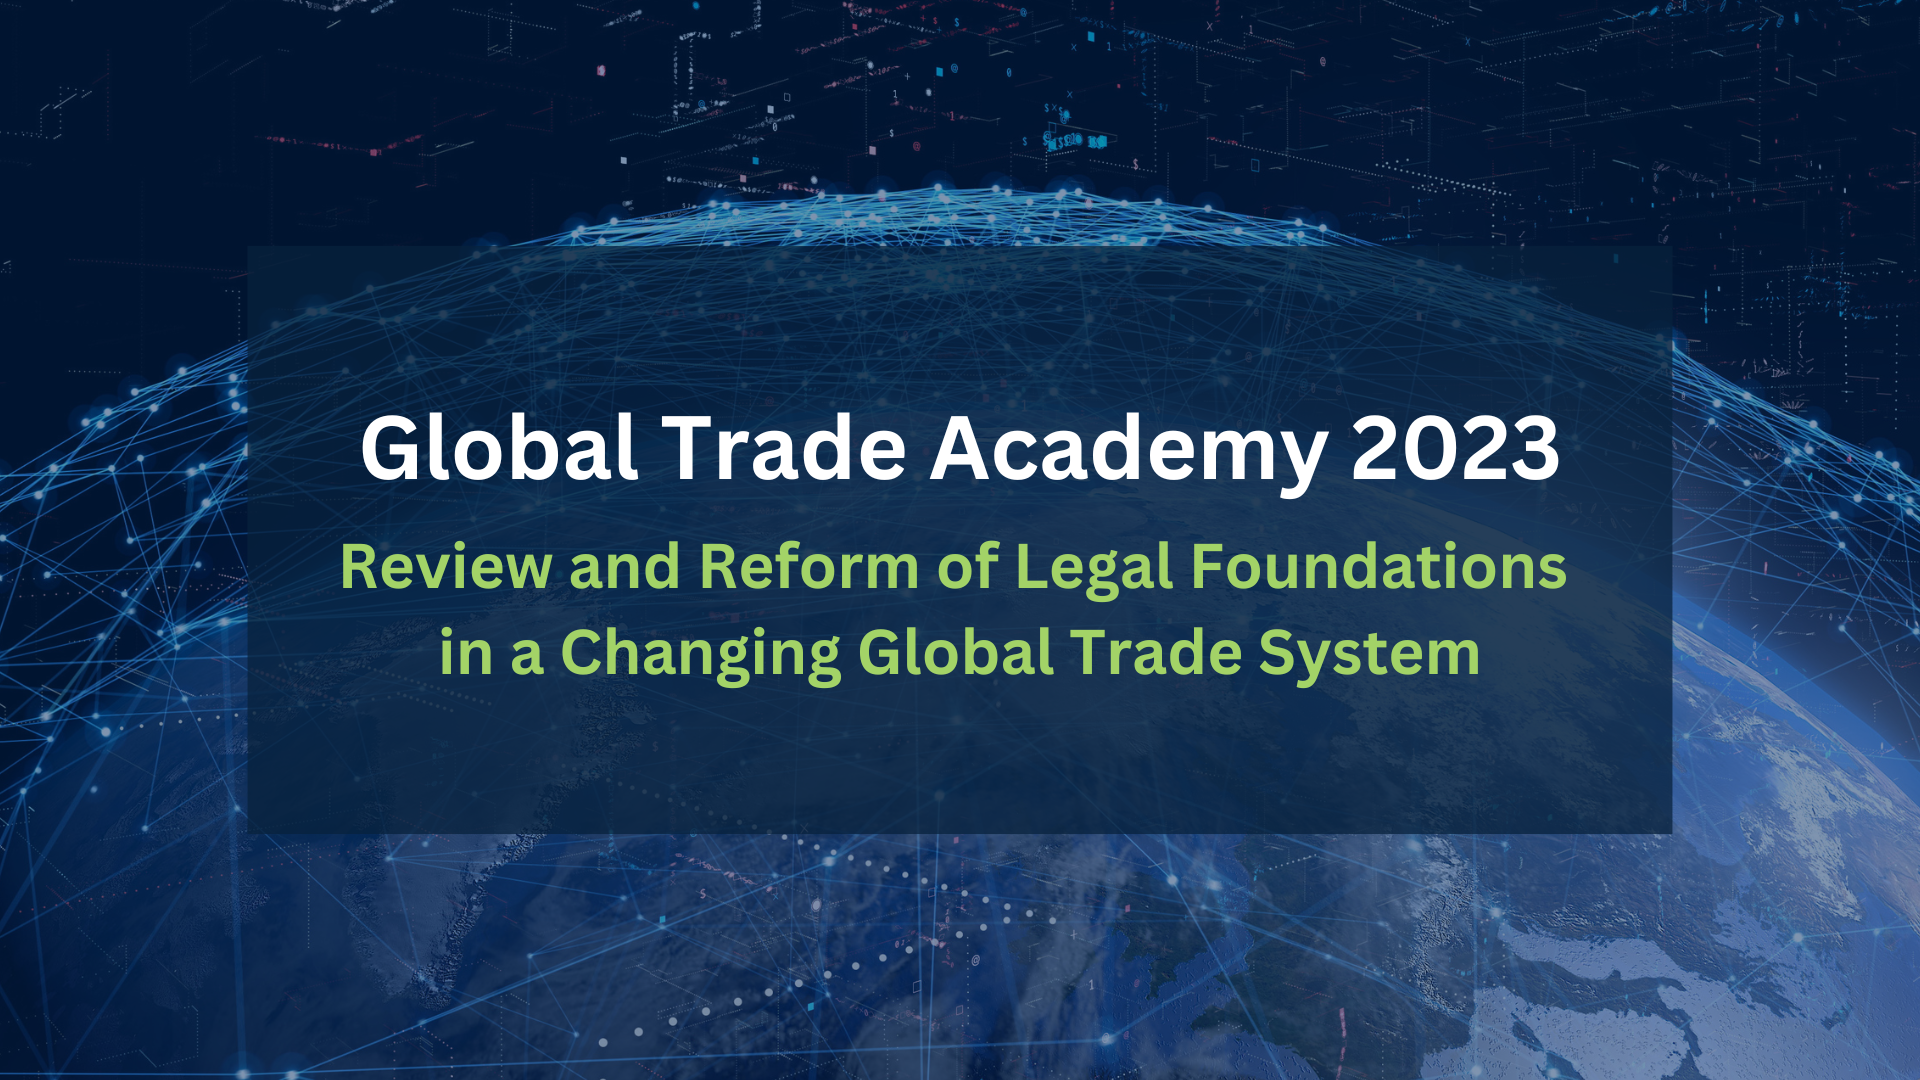 Link for the GLOBAL TRADE ACADEMY 2023 – REVIEW AND REFORM OF LEGAL FOUNDATIONS IN A CHANGING GLOBAL TRADING SYSTEM MARCH 27 – 31, 2023 event